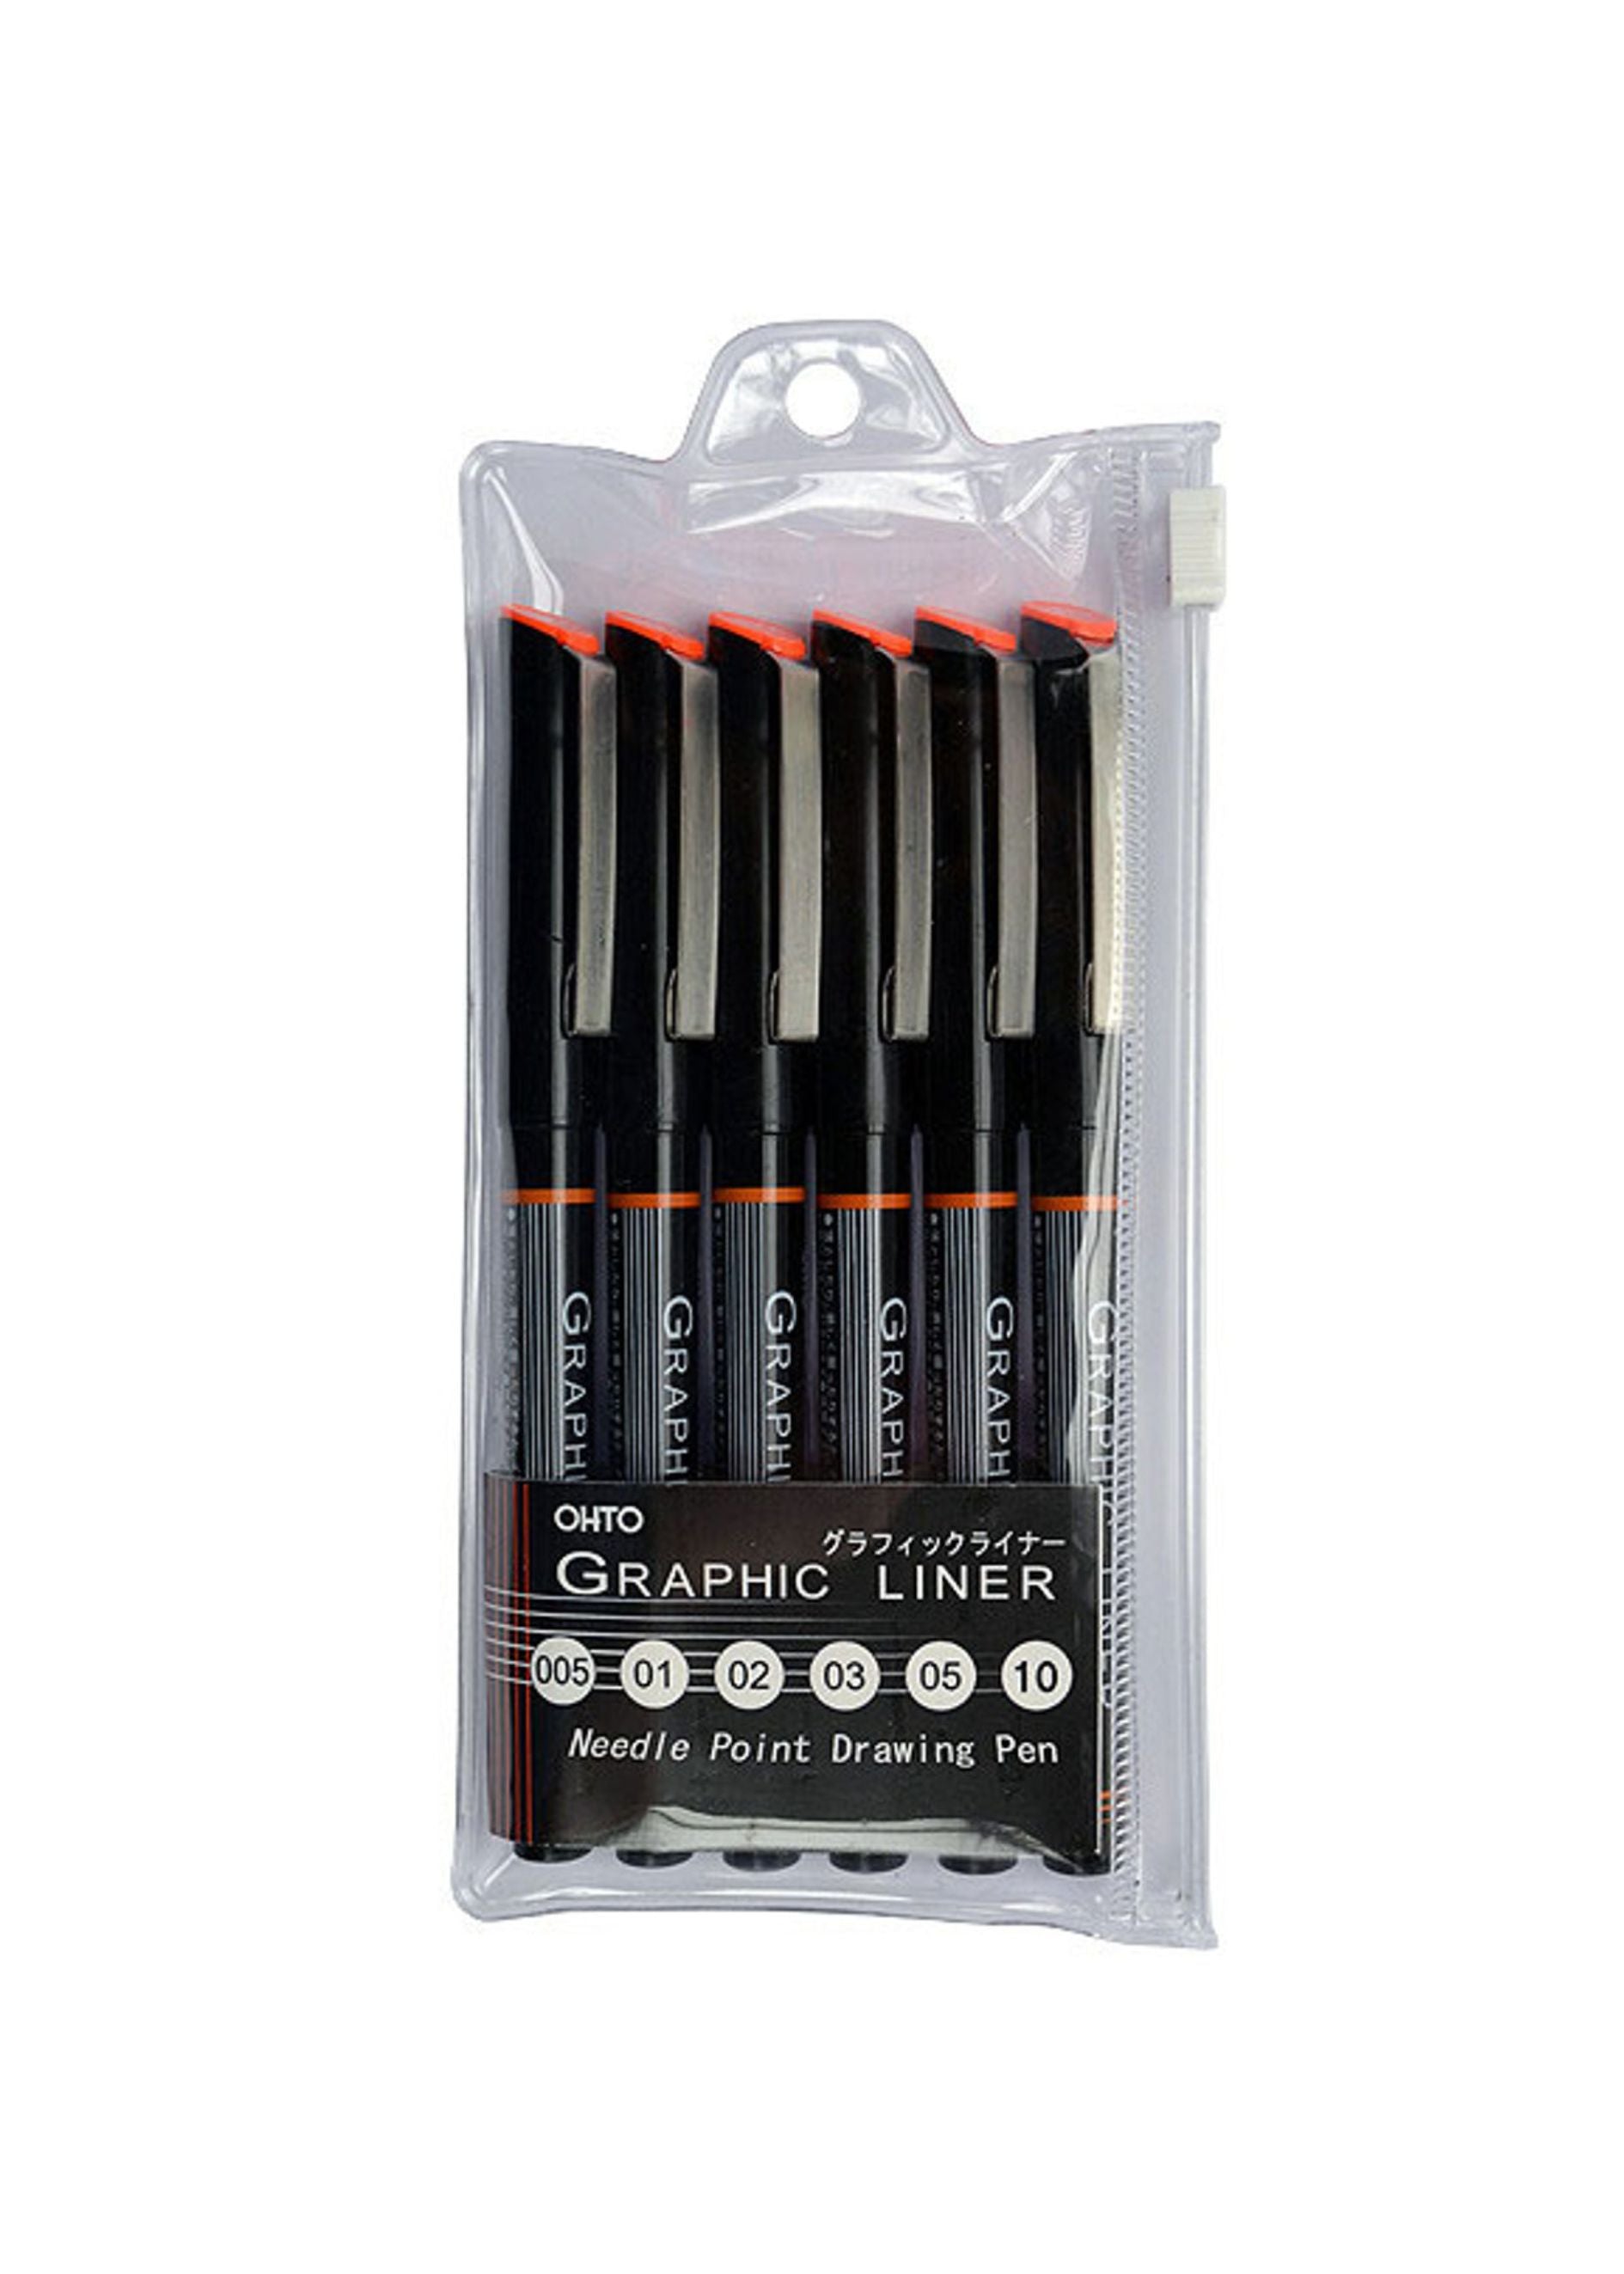 OHTO Graphic Liner Needle Point Drawing Pen (CFR-150GL01)